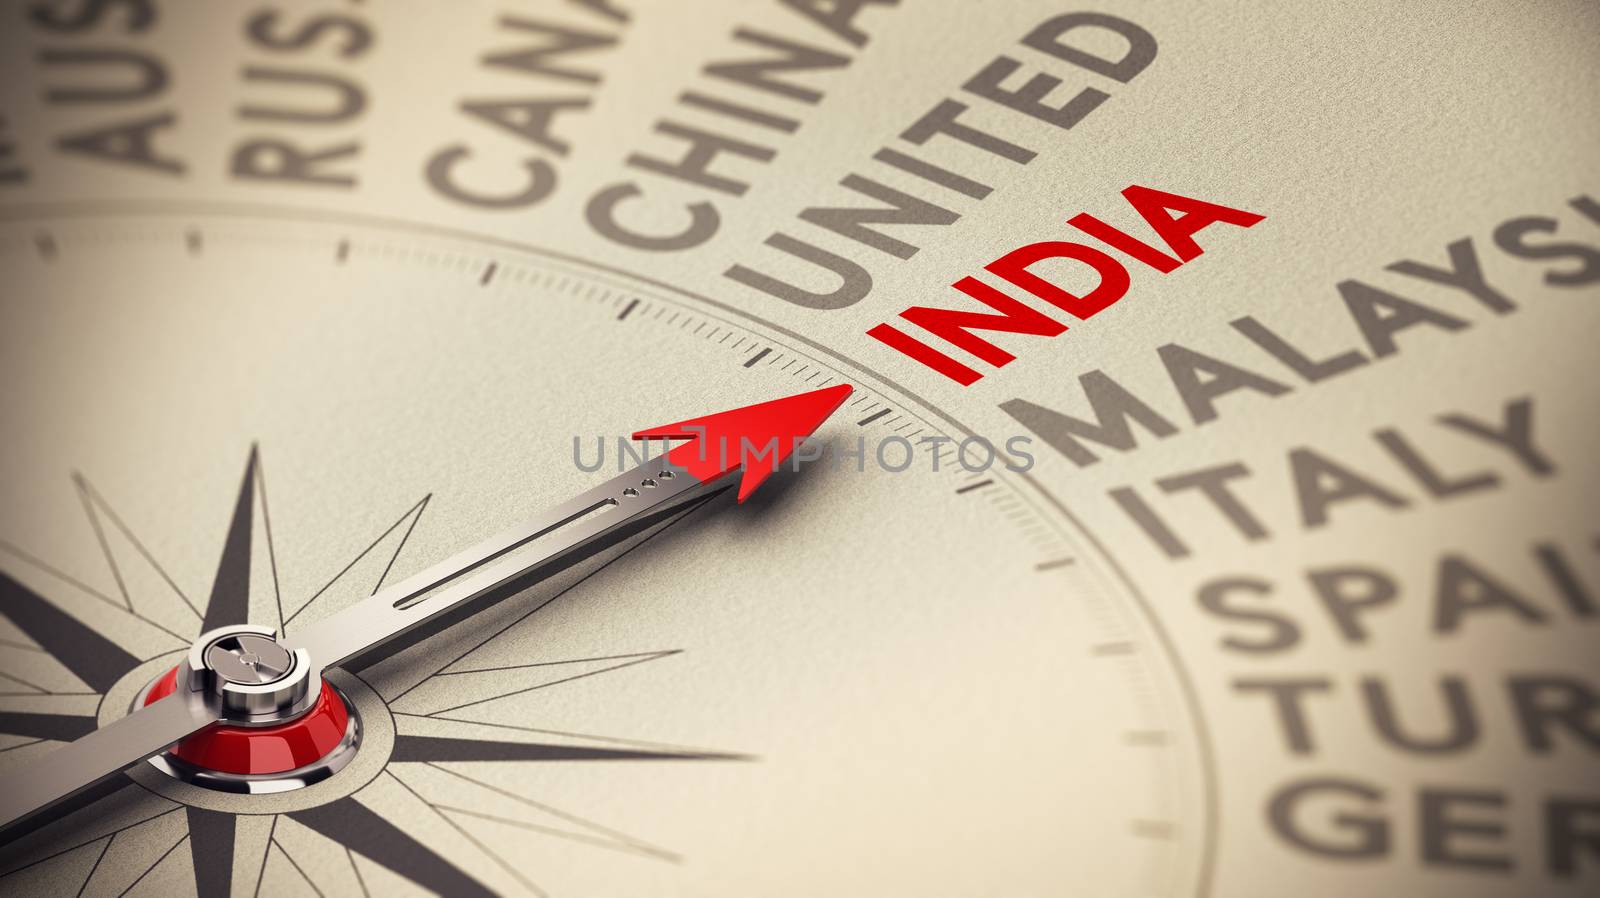 Business background concept. Compass with needle pointing to India. Red and beige tones plus blur effect.